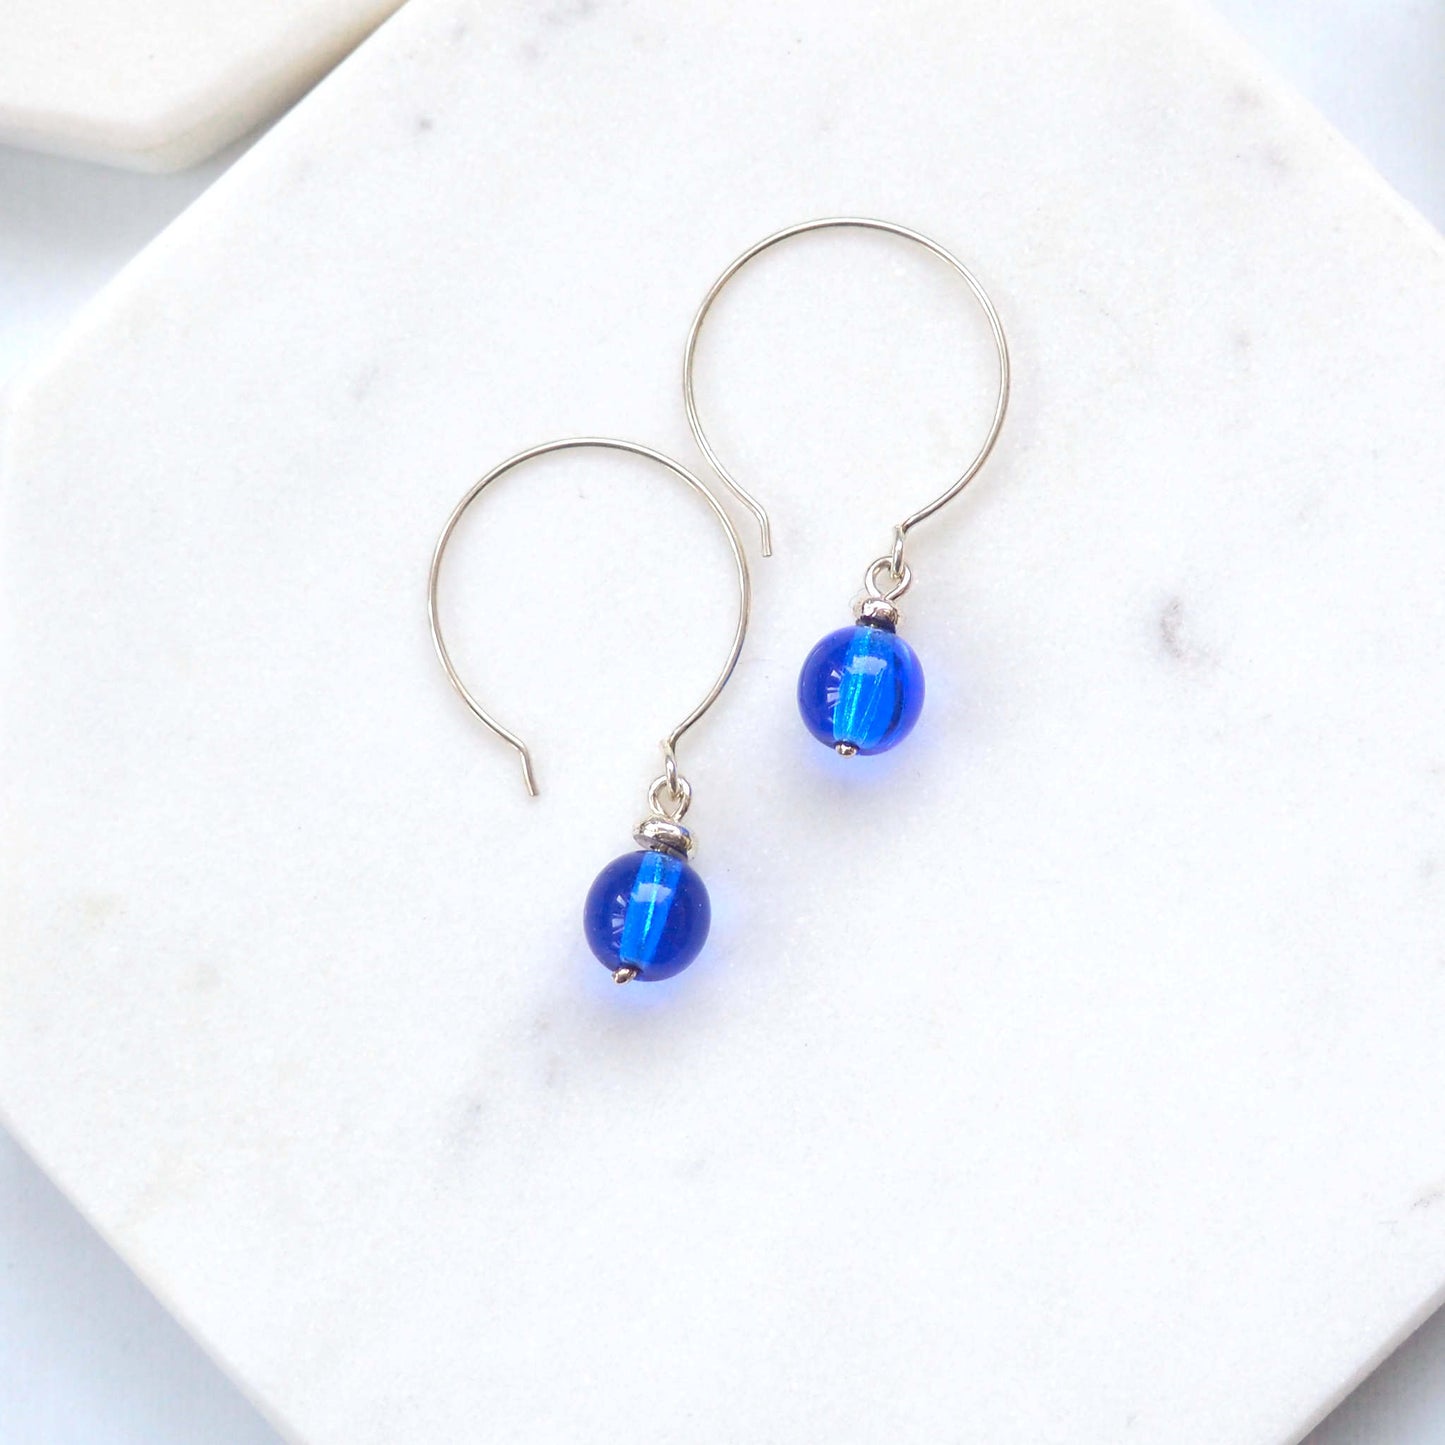 Cobalt blue Silver minimalist handmade silver hoops. Handcrafted ear wires with a round glass bead dropper. Made in Scotland by maram jewellery